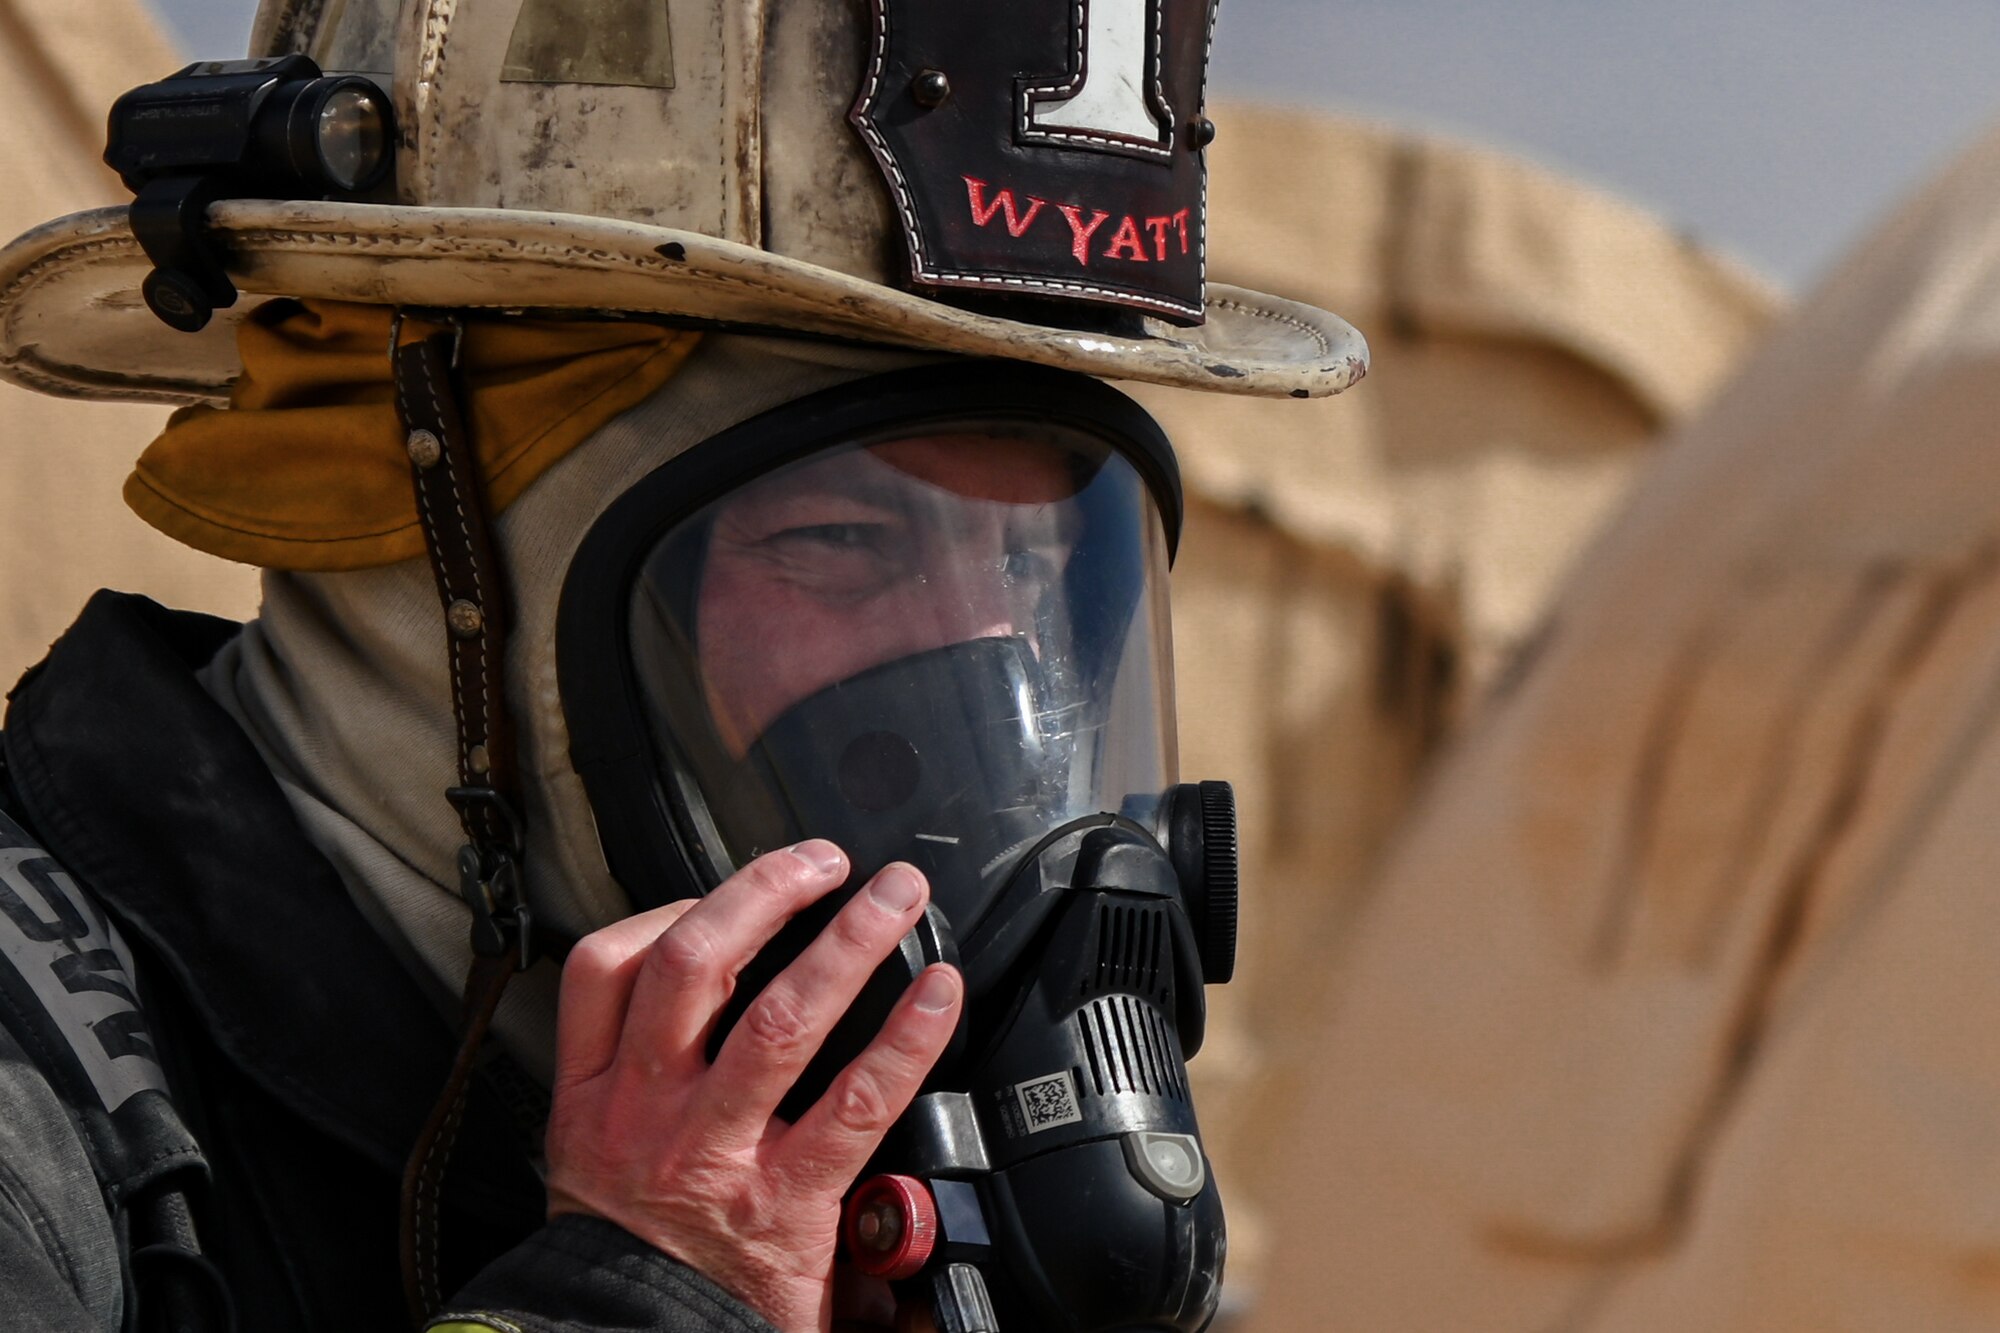 U.S. Air Force Brig. Gen. Robert Davis, 378th Air Expeditionary Wing commander, removes his helmet after training alongside firefighters from the 378th Expeditionary Civil Engineer Squadron at Prince Sultan Air Base, Kingdom of Saudi Arabia, Dec. 9, 2021. Davis spent the day training alongside members of the fire department during an immersion tour with the 378th ECES. (U.S. Air Force photo by Staff Sgt. Christina Graves)